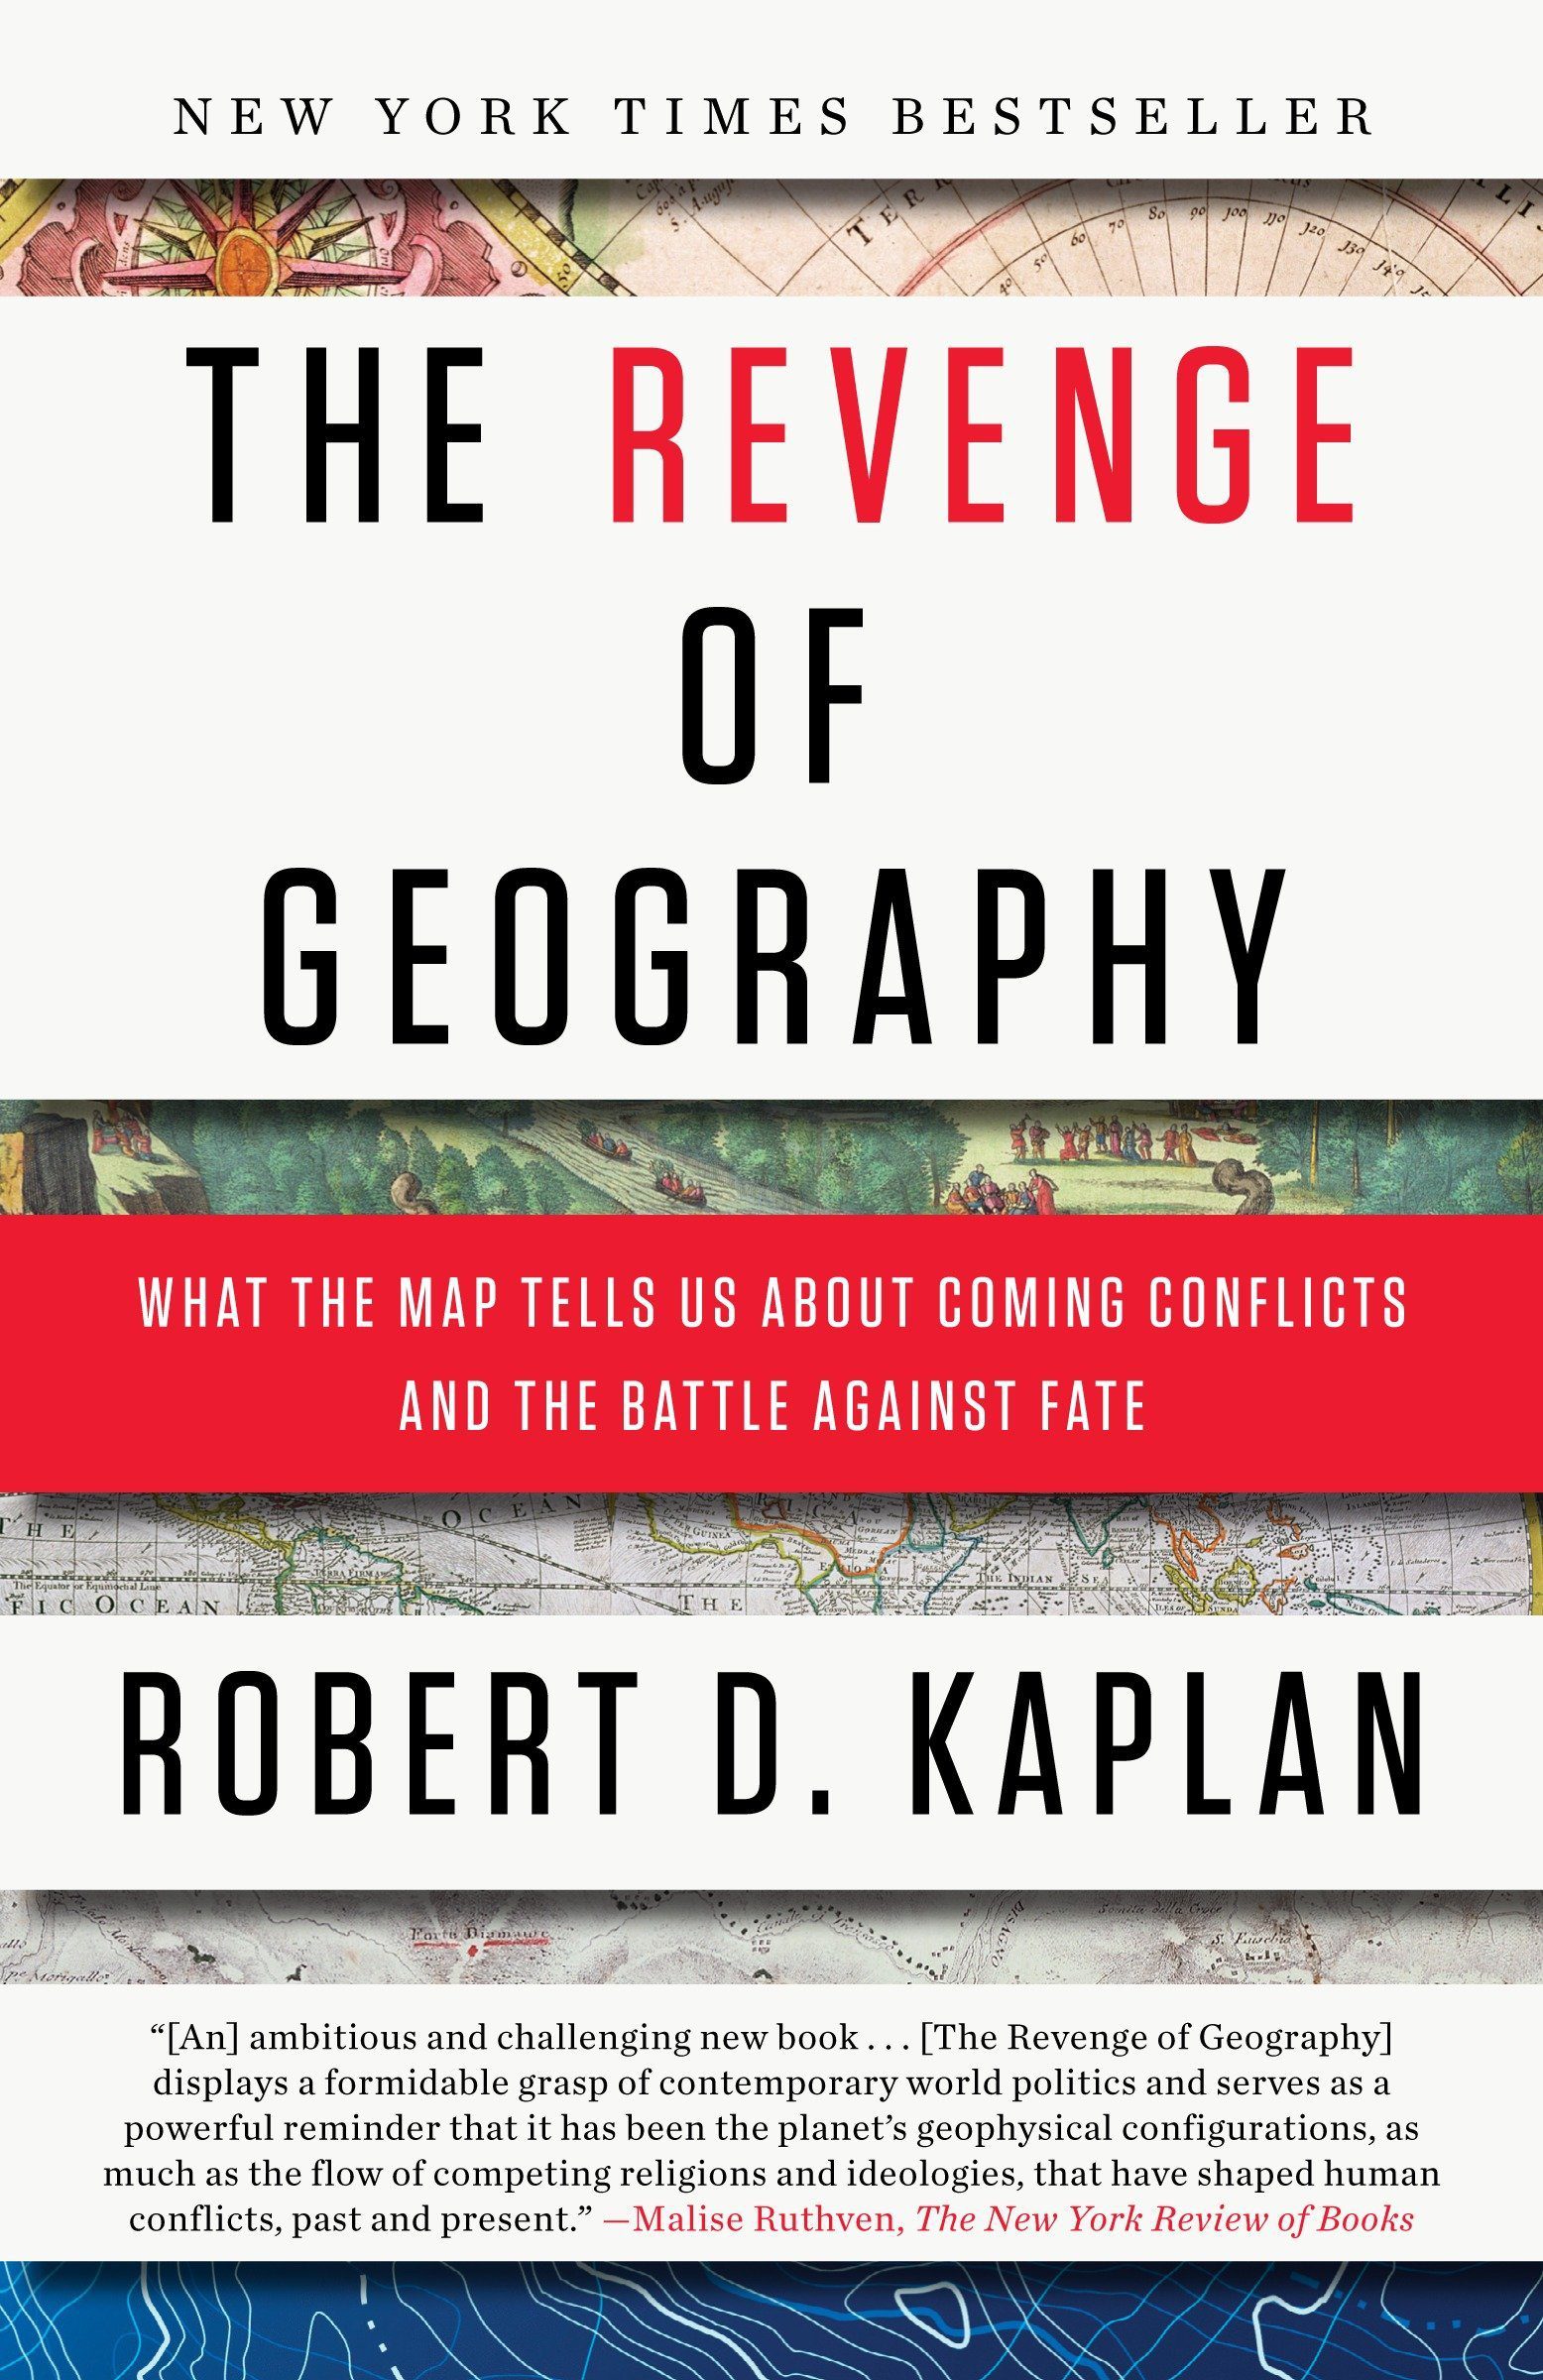 robert kaplan revenge of geography, The Revenge of Geography: What the Map Tells Us About Coming Conflicts and the Battle Against Fate